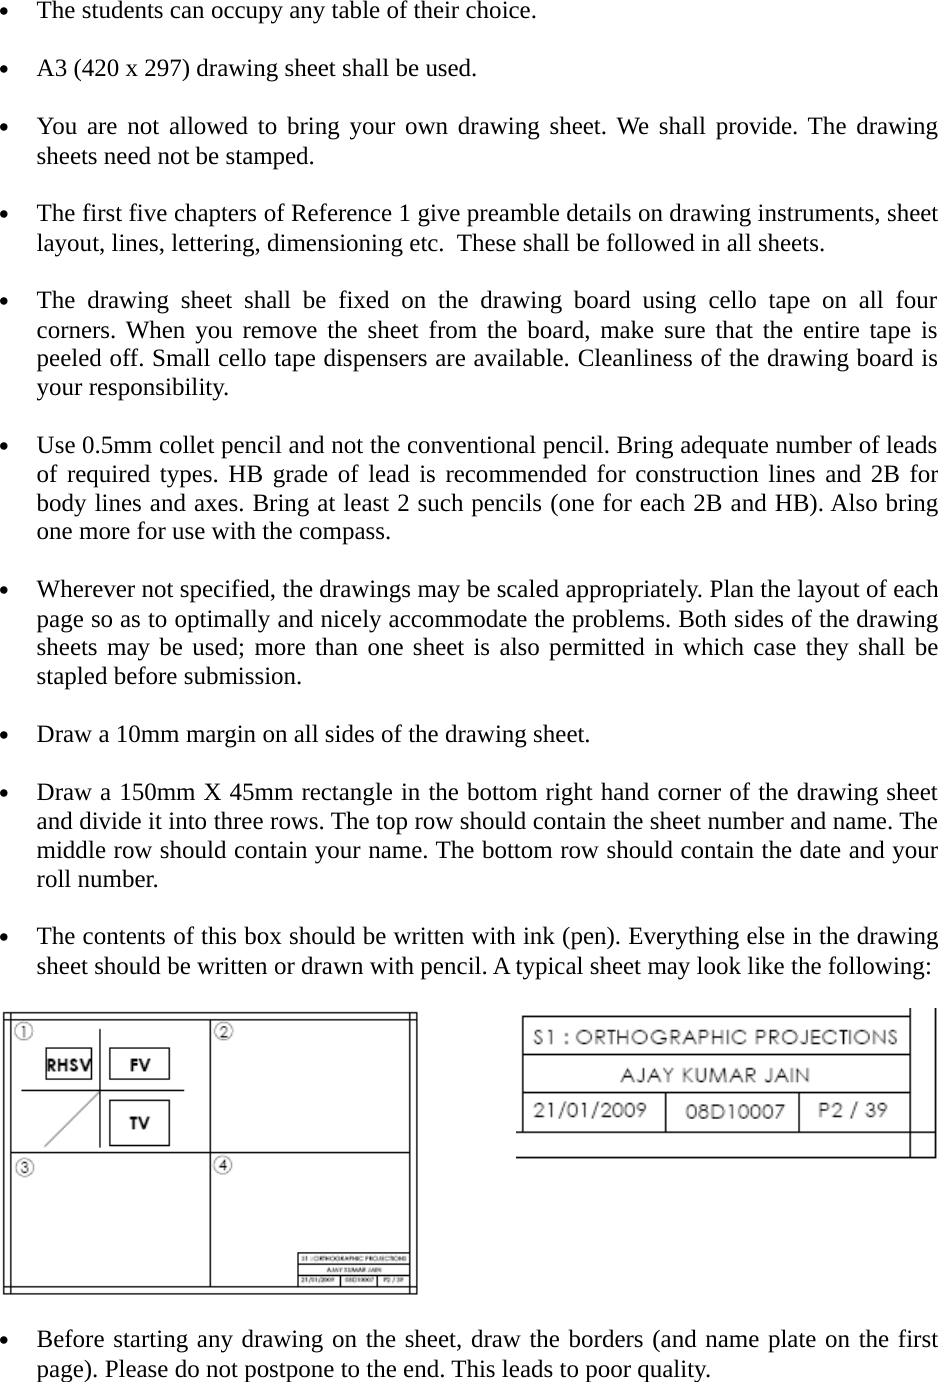 Page 7 of 8 - ME-119: ENGINEERING GRAPHICS AND DRAWING Sheet00-Instructions For Students-20140825